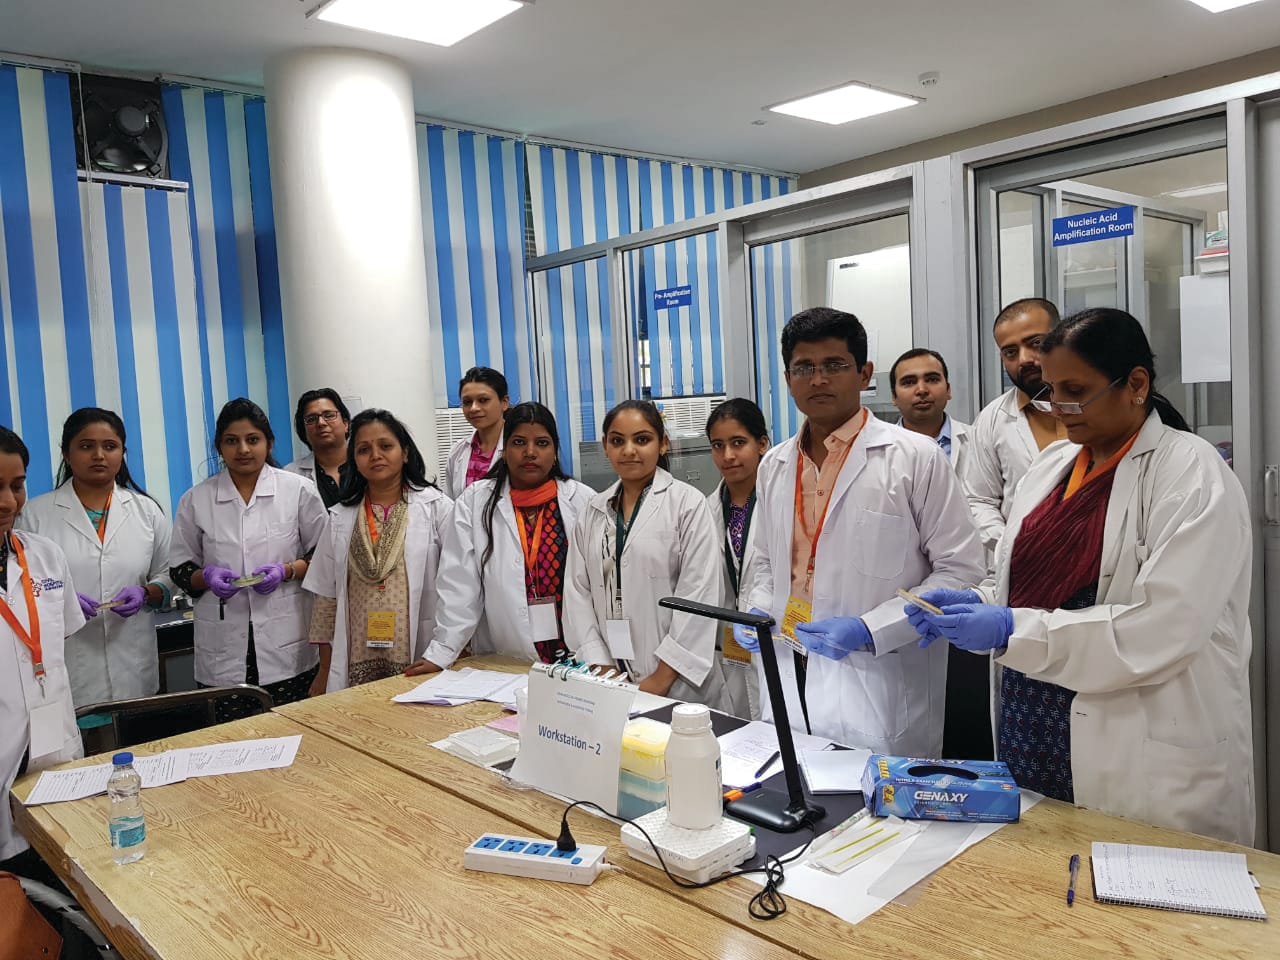 CDC staff trains lab scientists across India on antibiotic susceptibility testing for colistin using broth microdilution, Chandigarh, Punjab, 2018. Photo credit: CDC India office